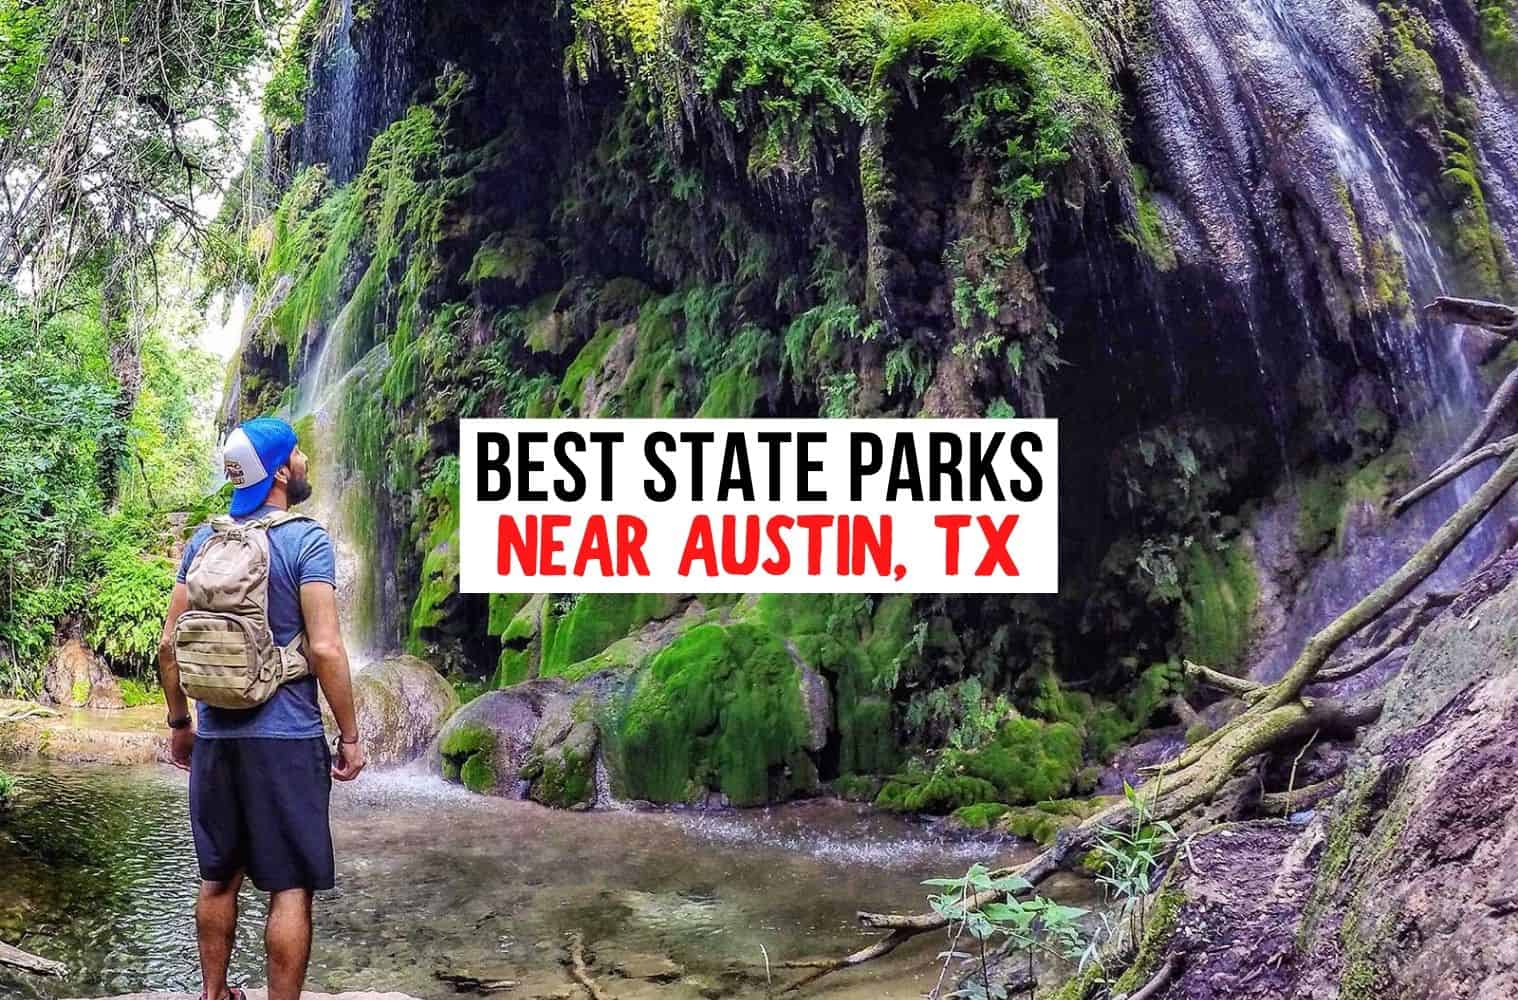 12 Best State Parks near AUSTIN for Camping - [2022]